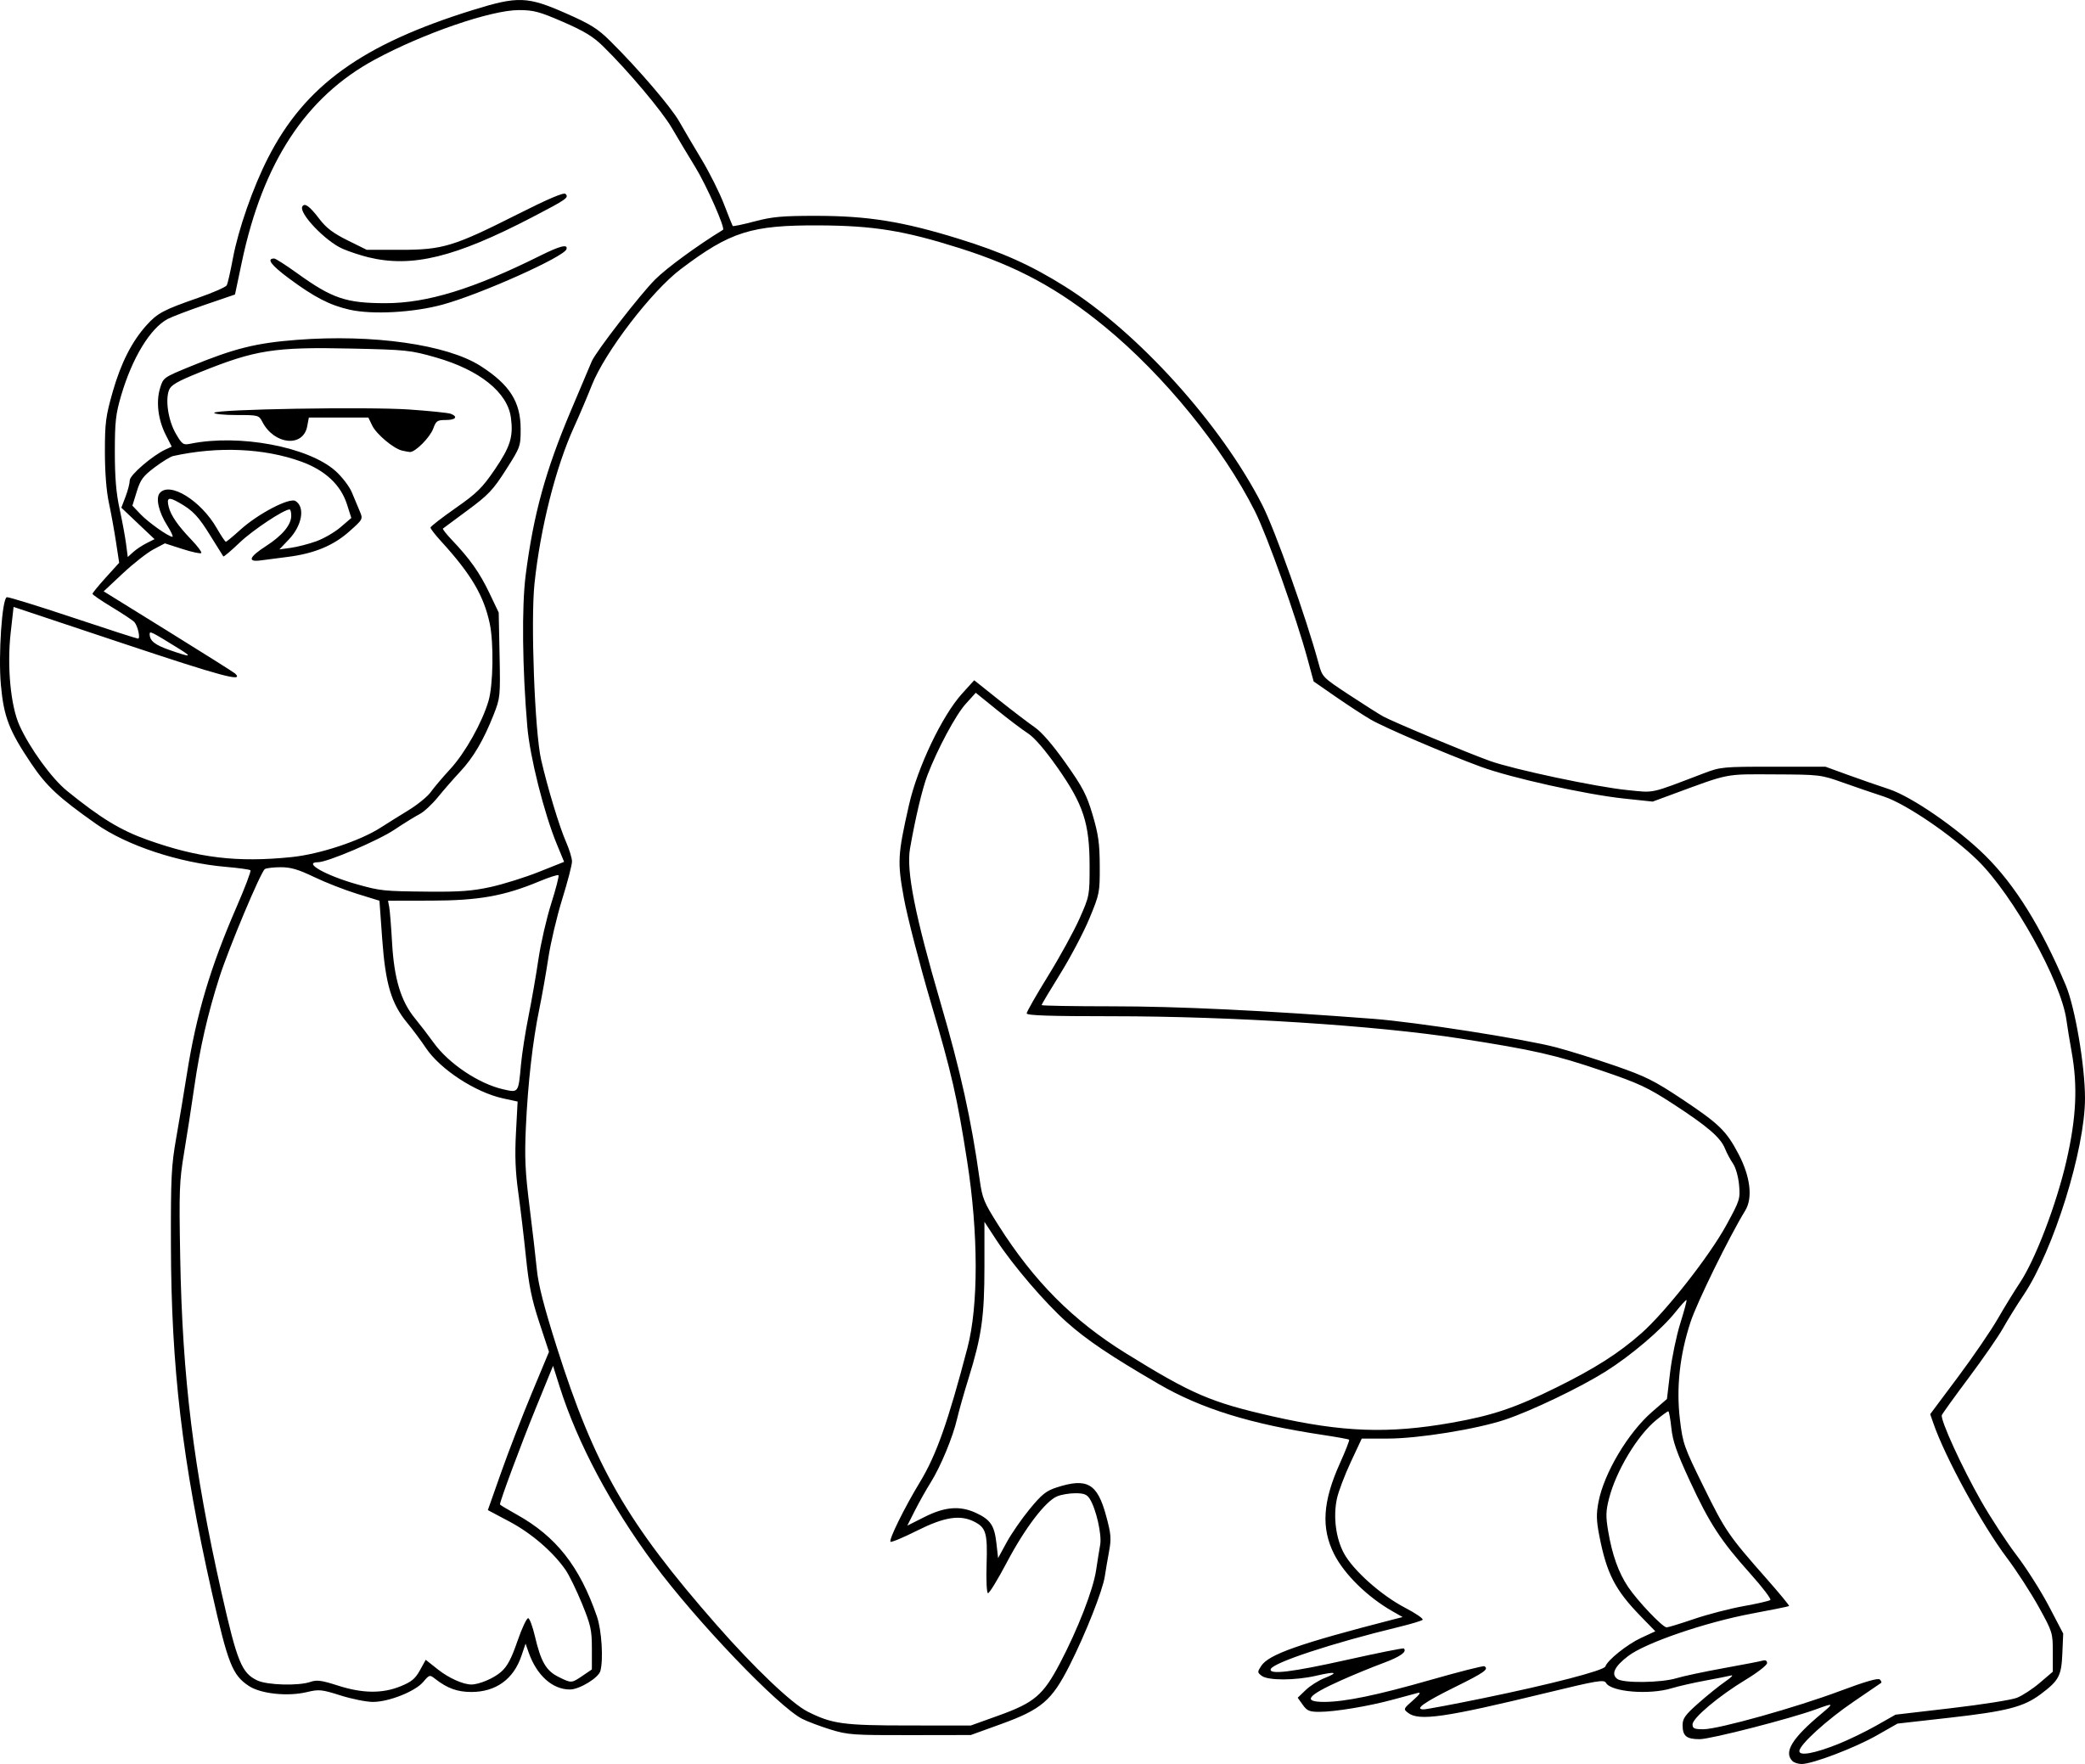 Gorilla drawing and coloring page